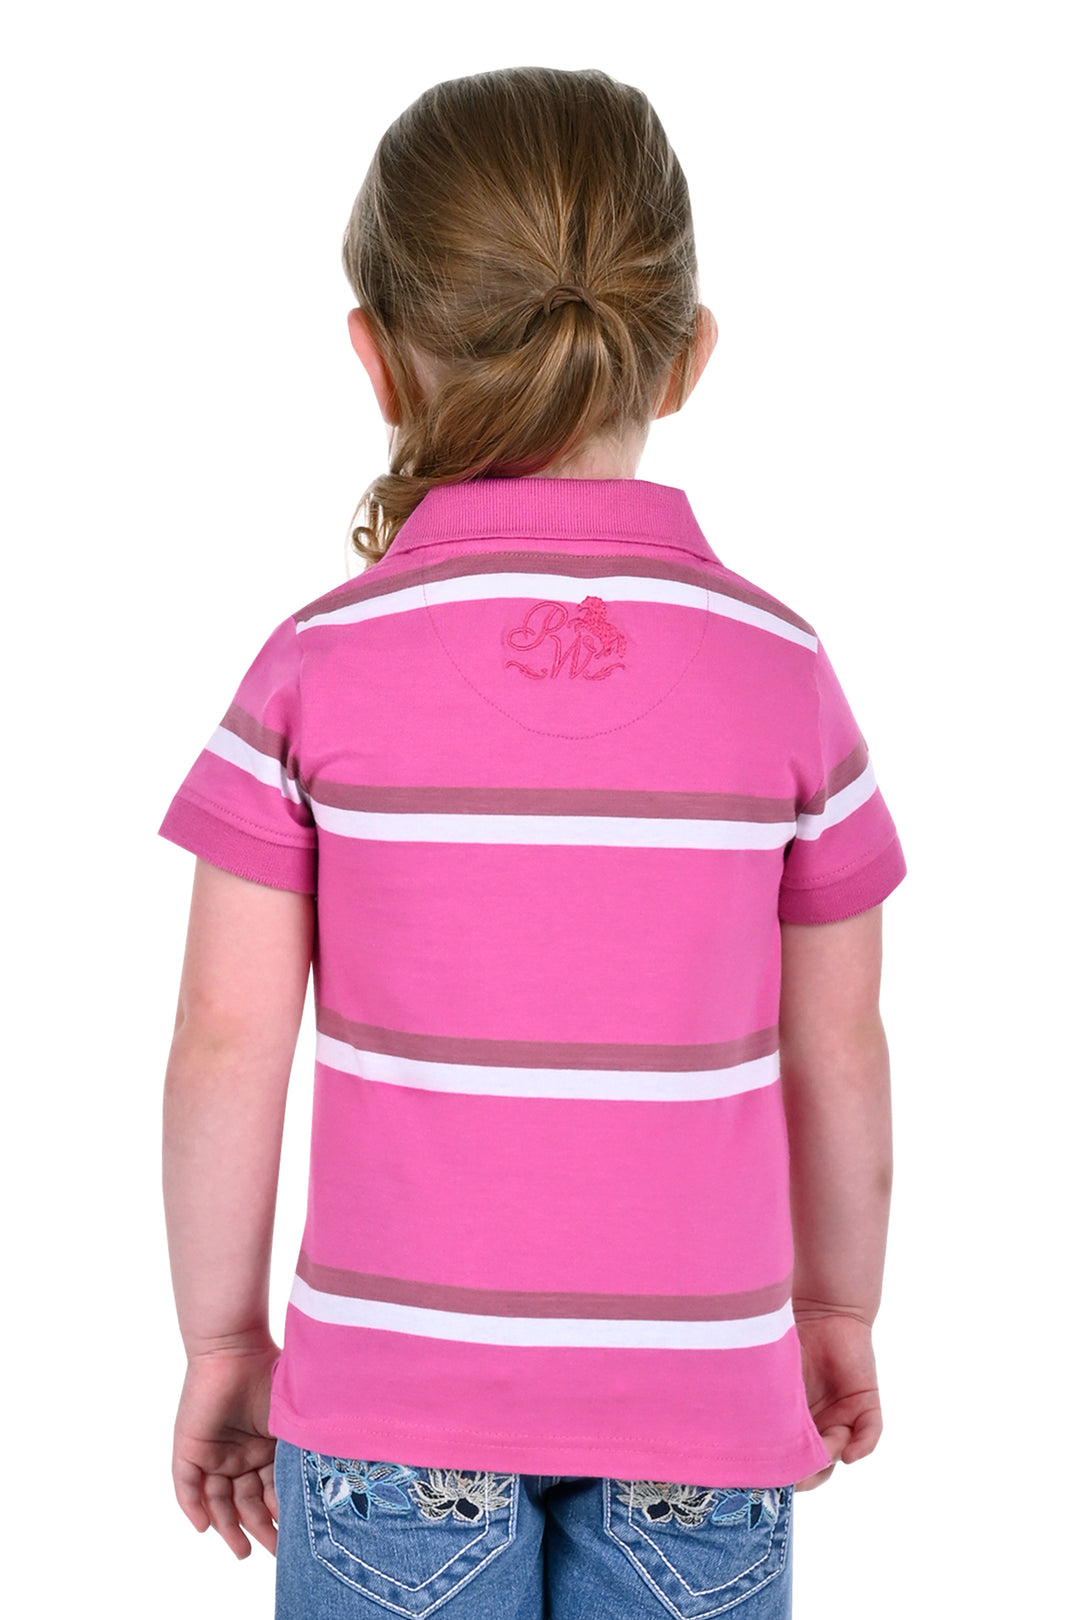 Pure Western - Girls Emerie Pink Polo